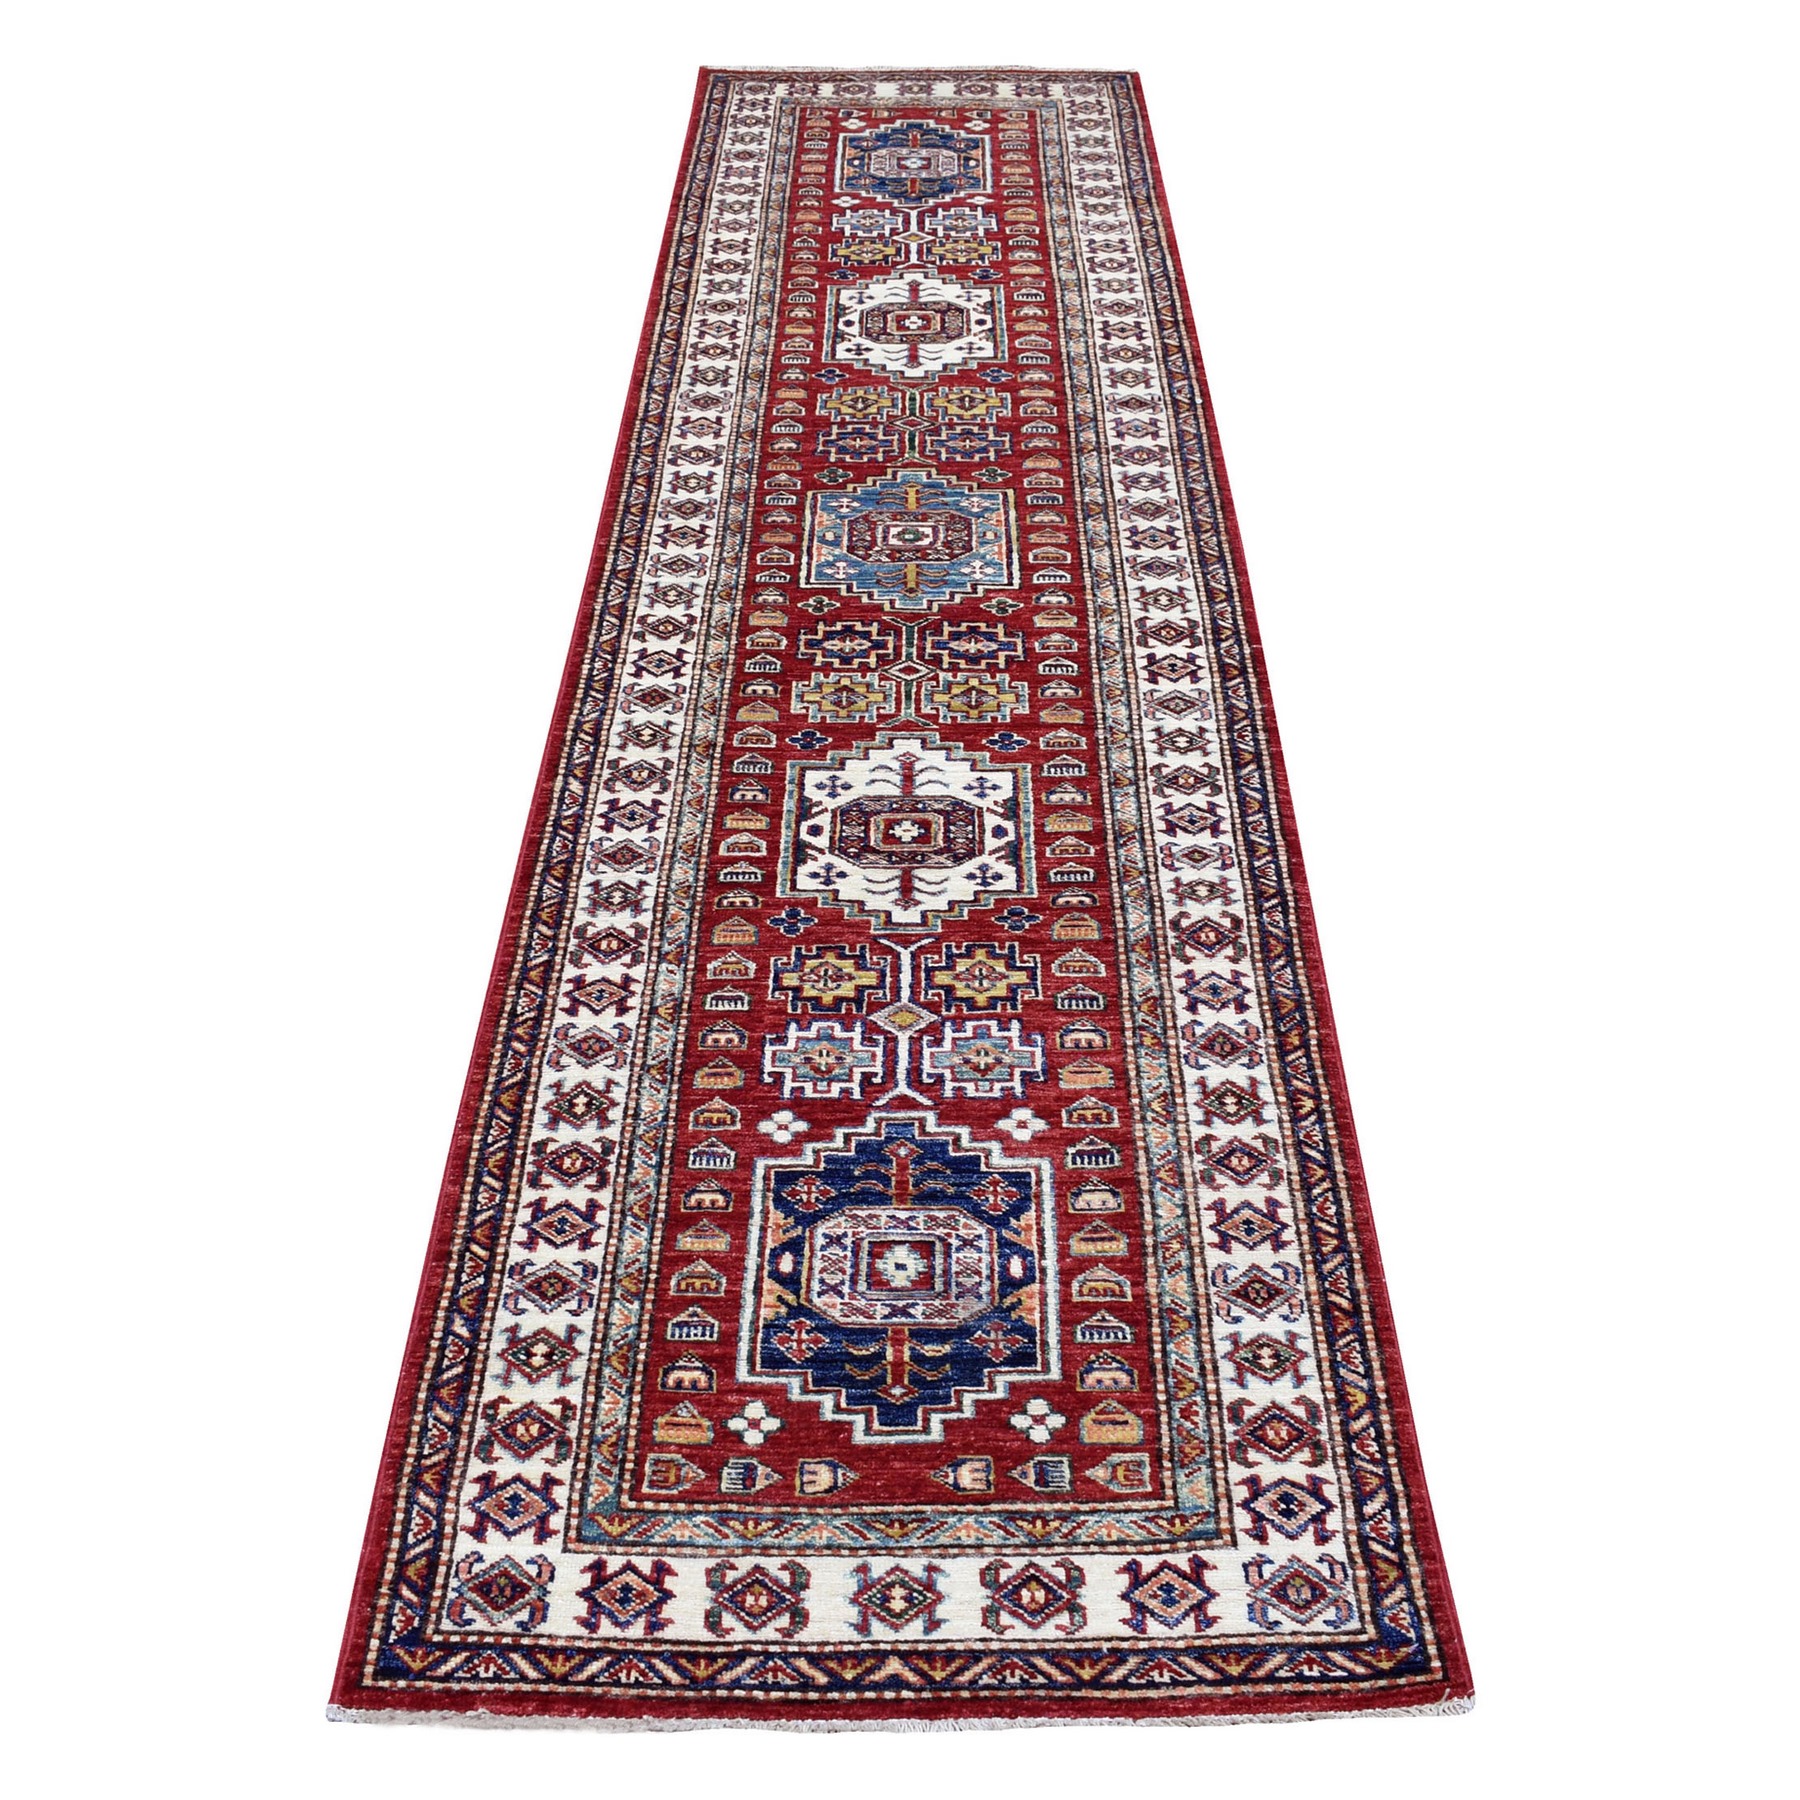 2'7"x9'7" Rich Red Super Kazak with Geometric Medallions Hand Woven Pure Shiny Wool Oriental Runner Rug 